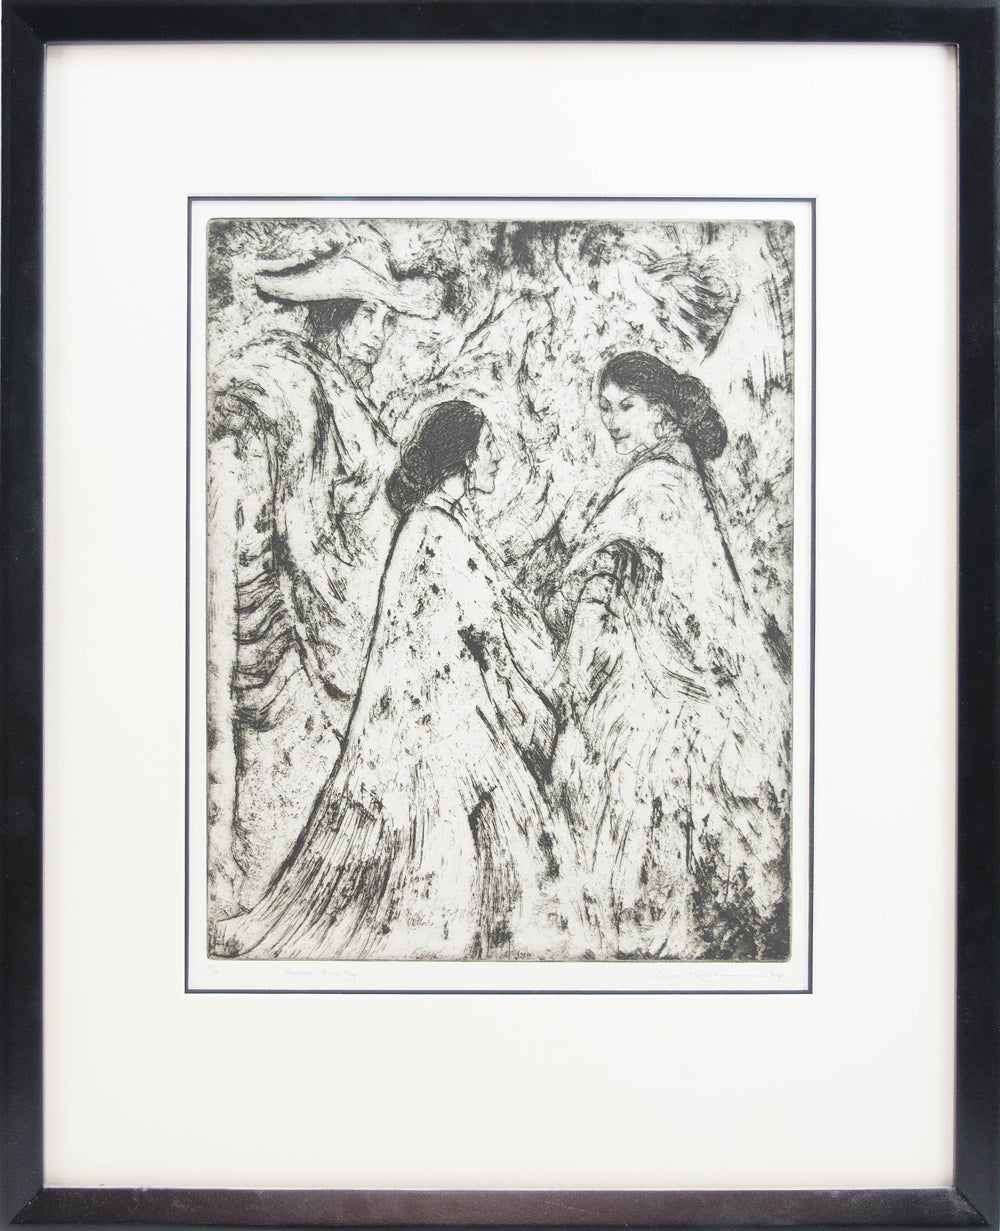 Gene Kloss (1903-1996) - Apaches A-Visiting (PDC90323A-0318-001)